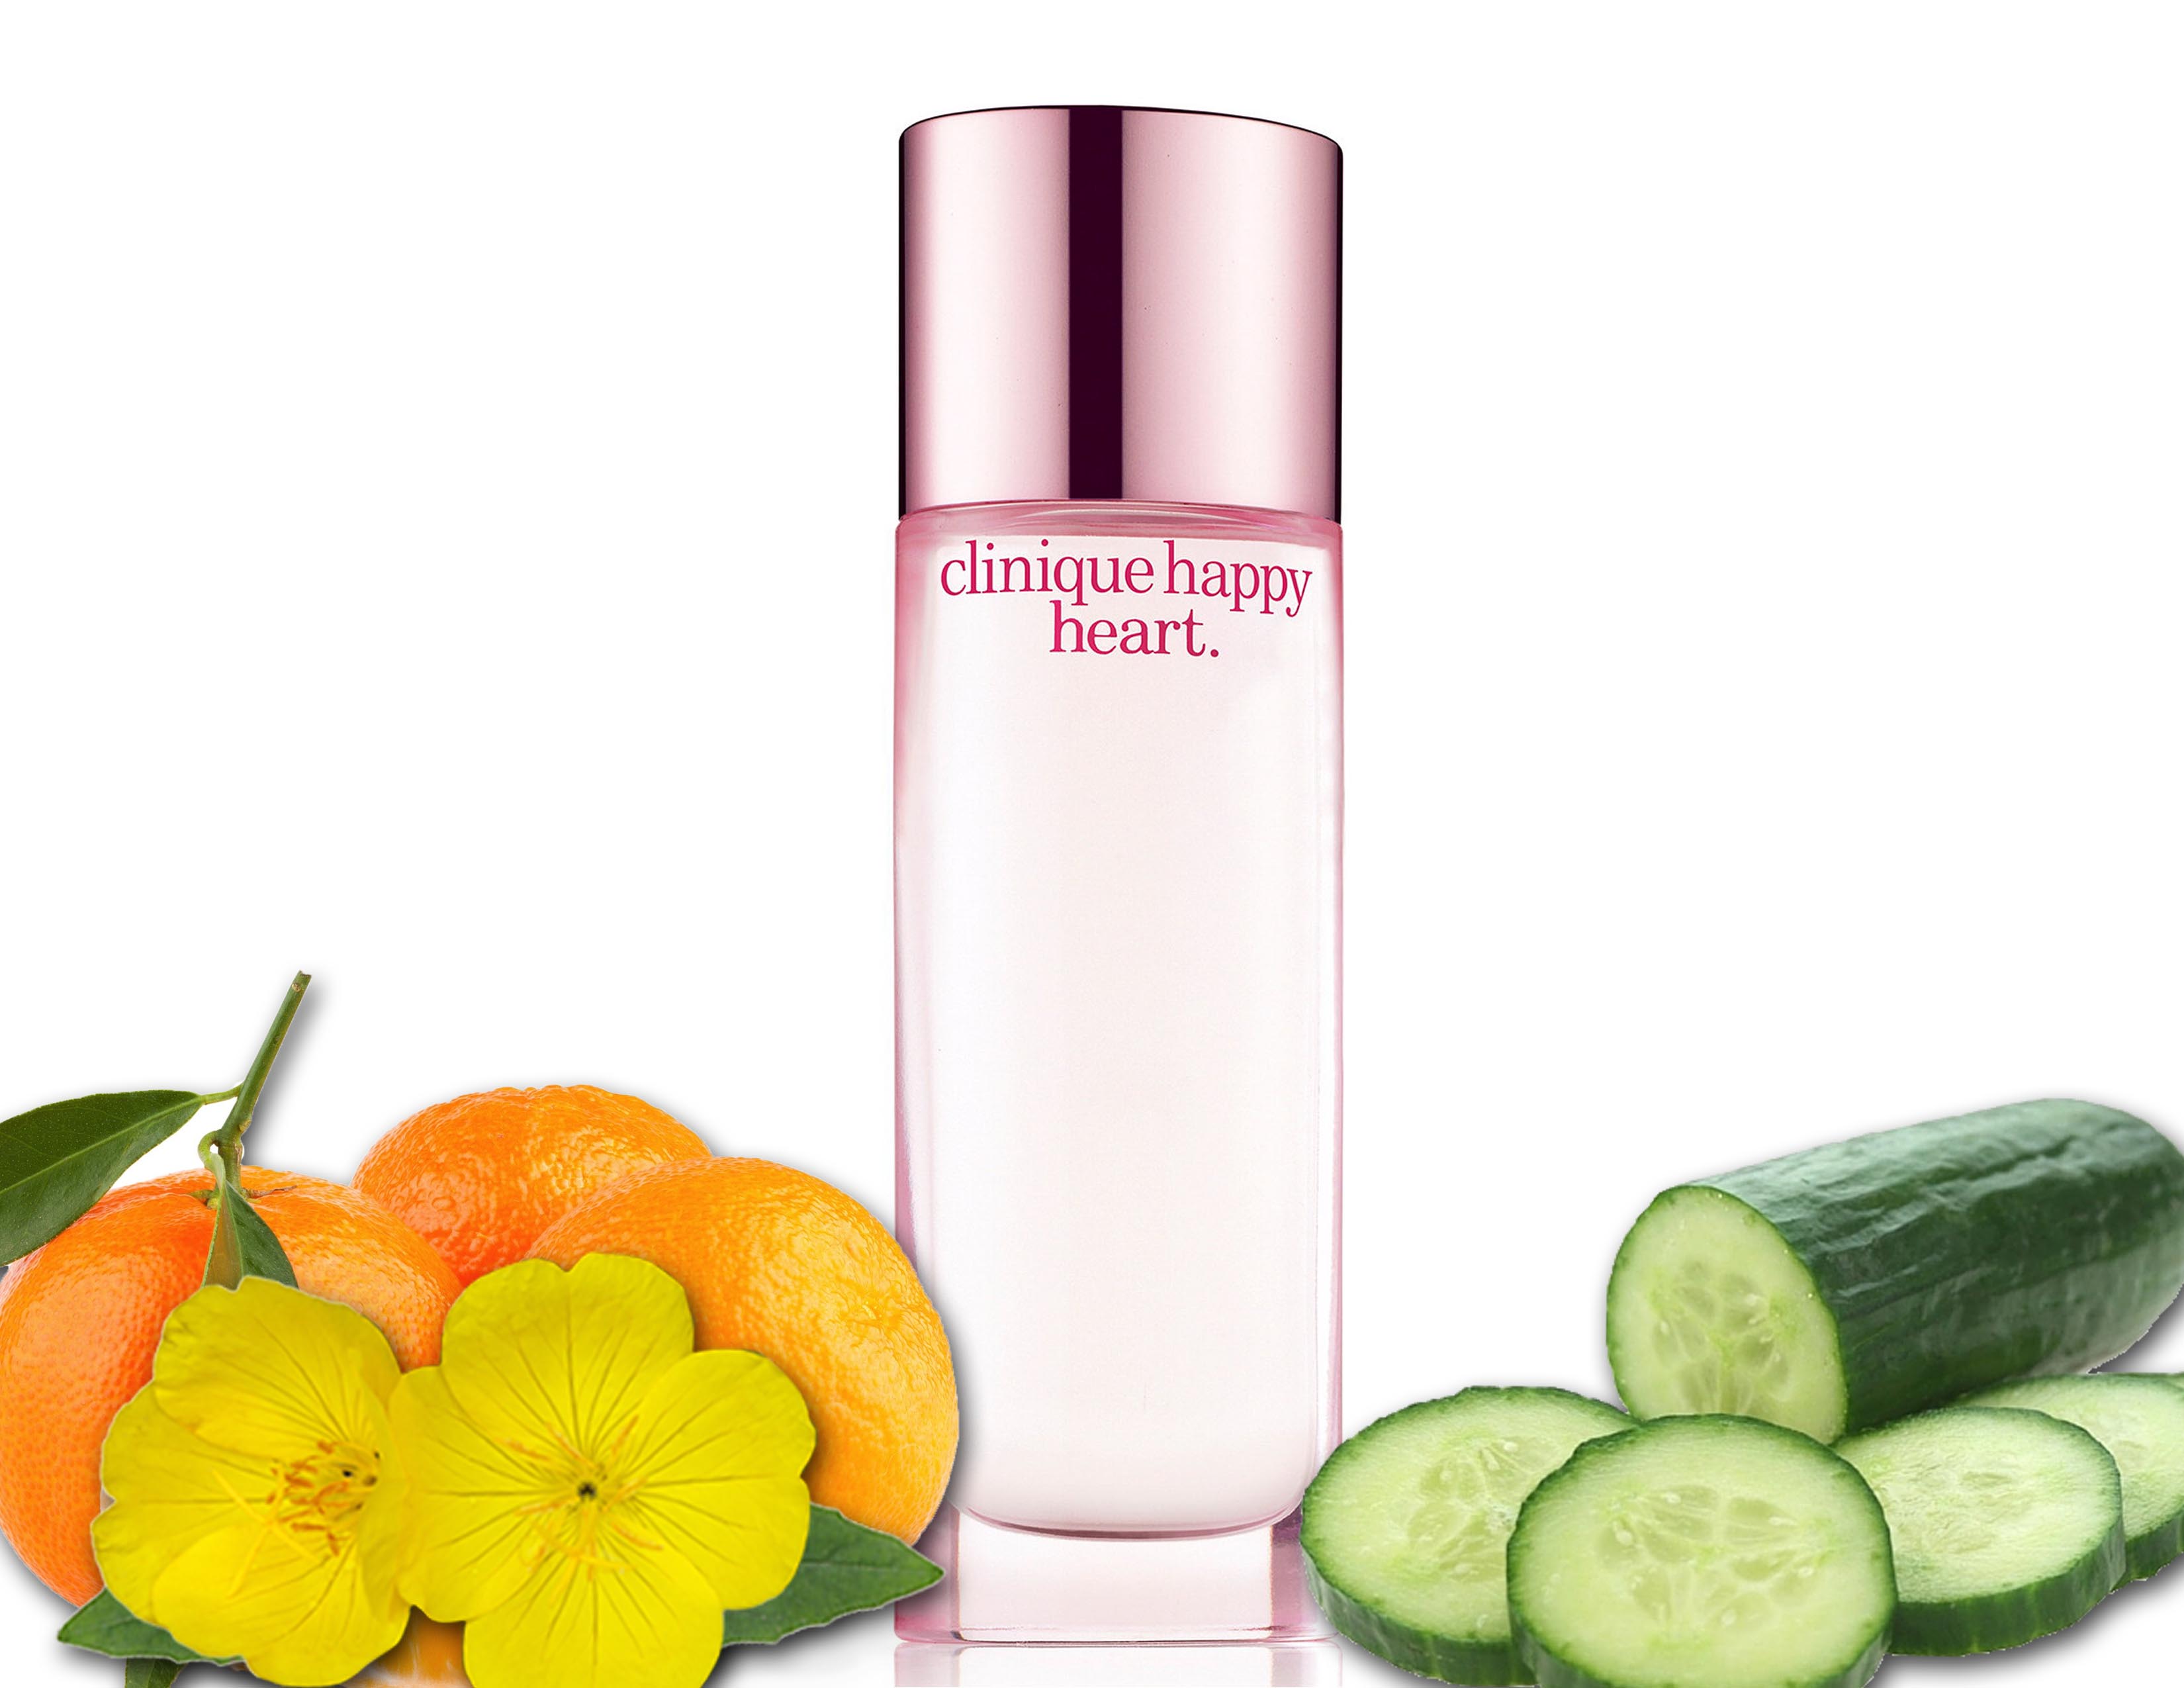 Clinique happy heart fragrance review